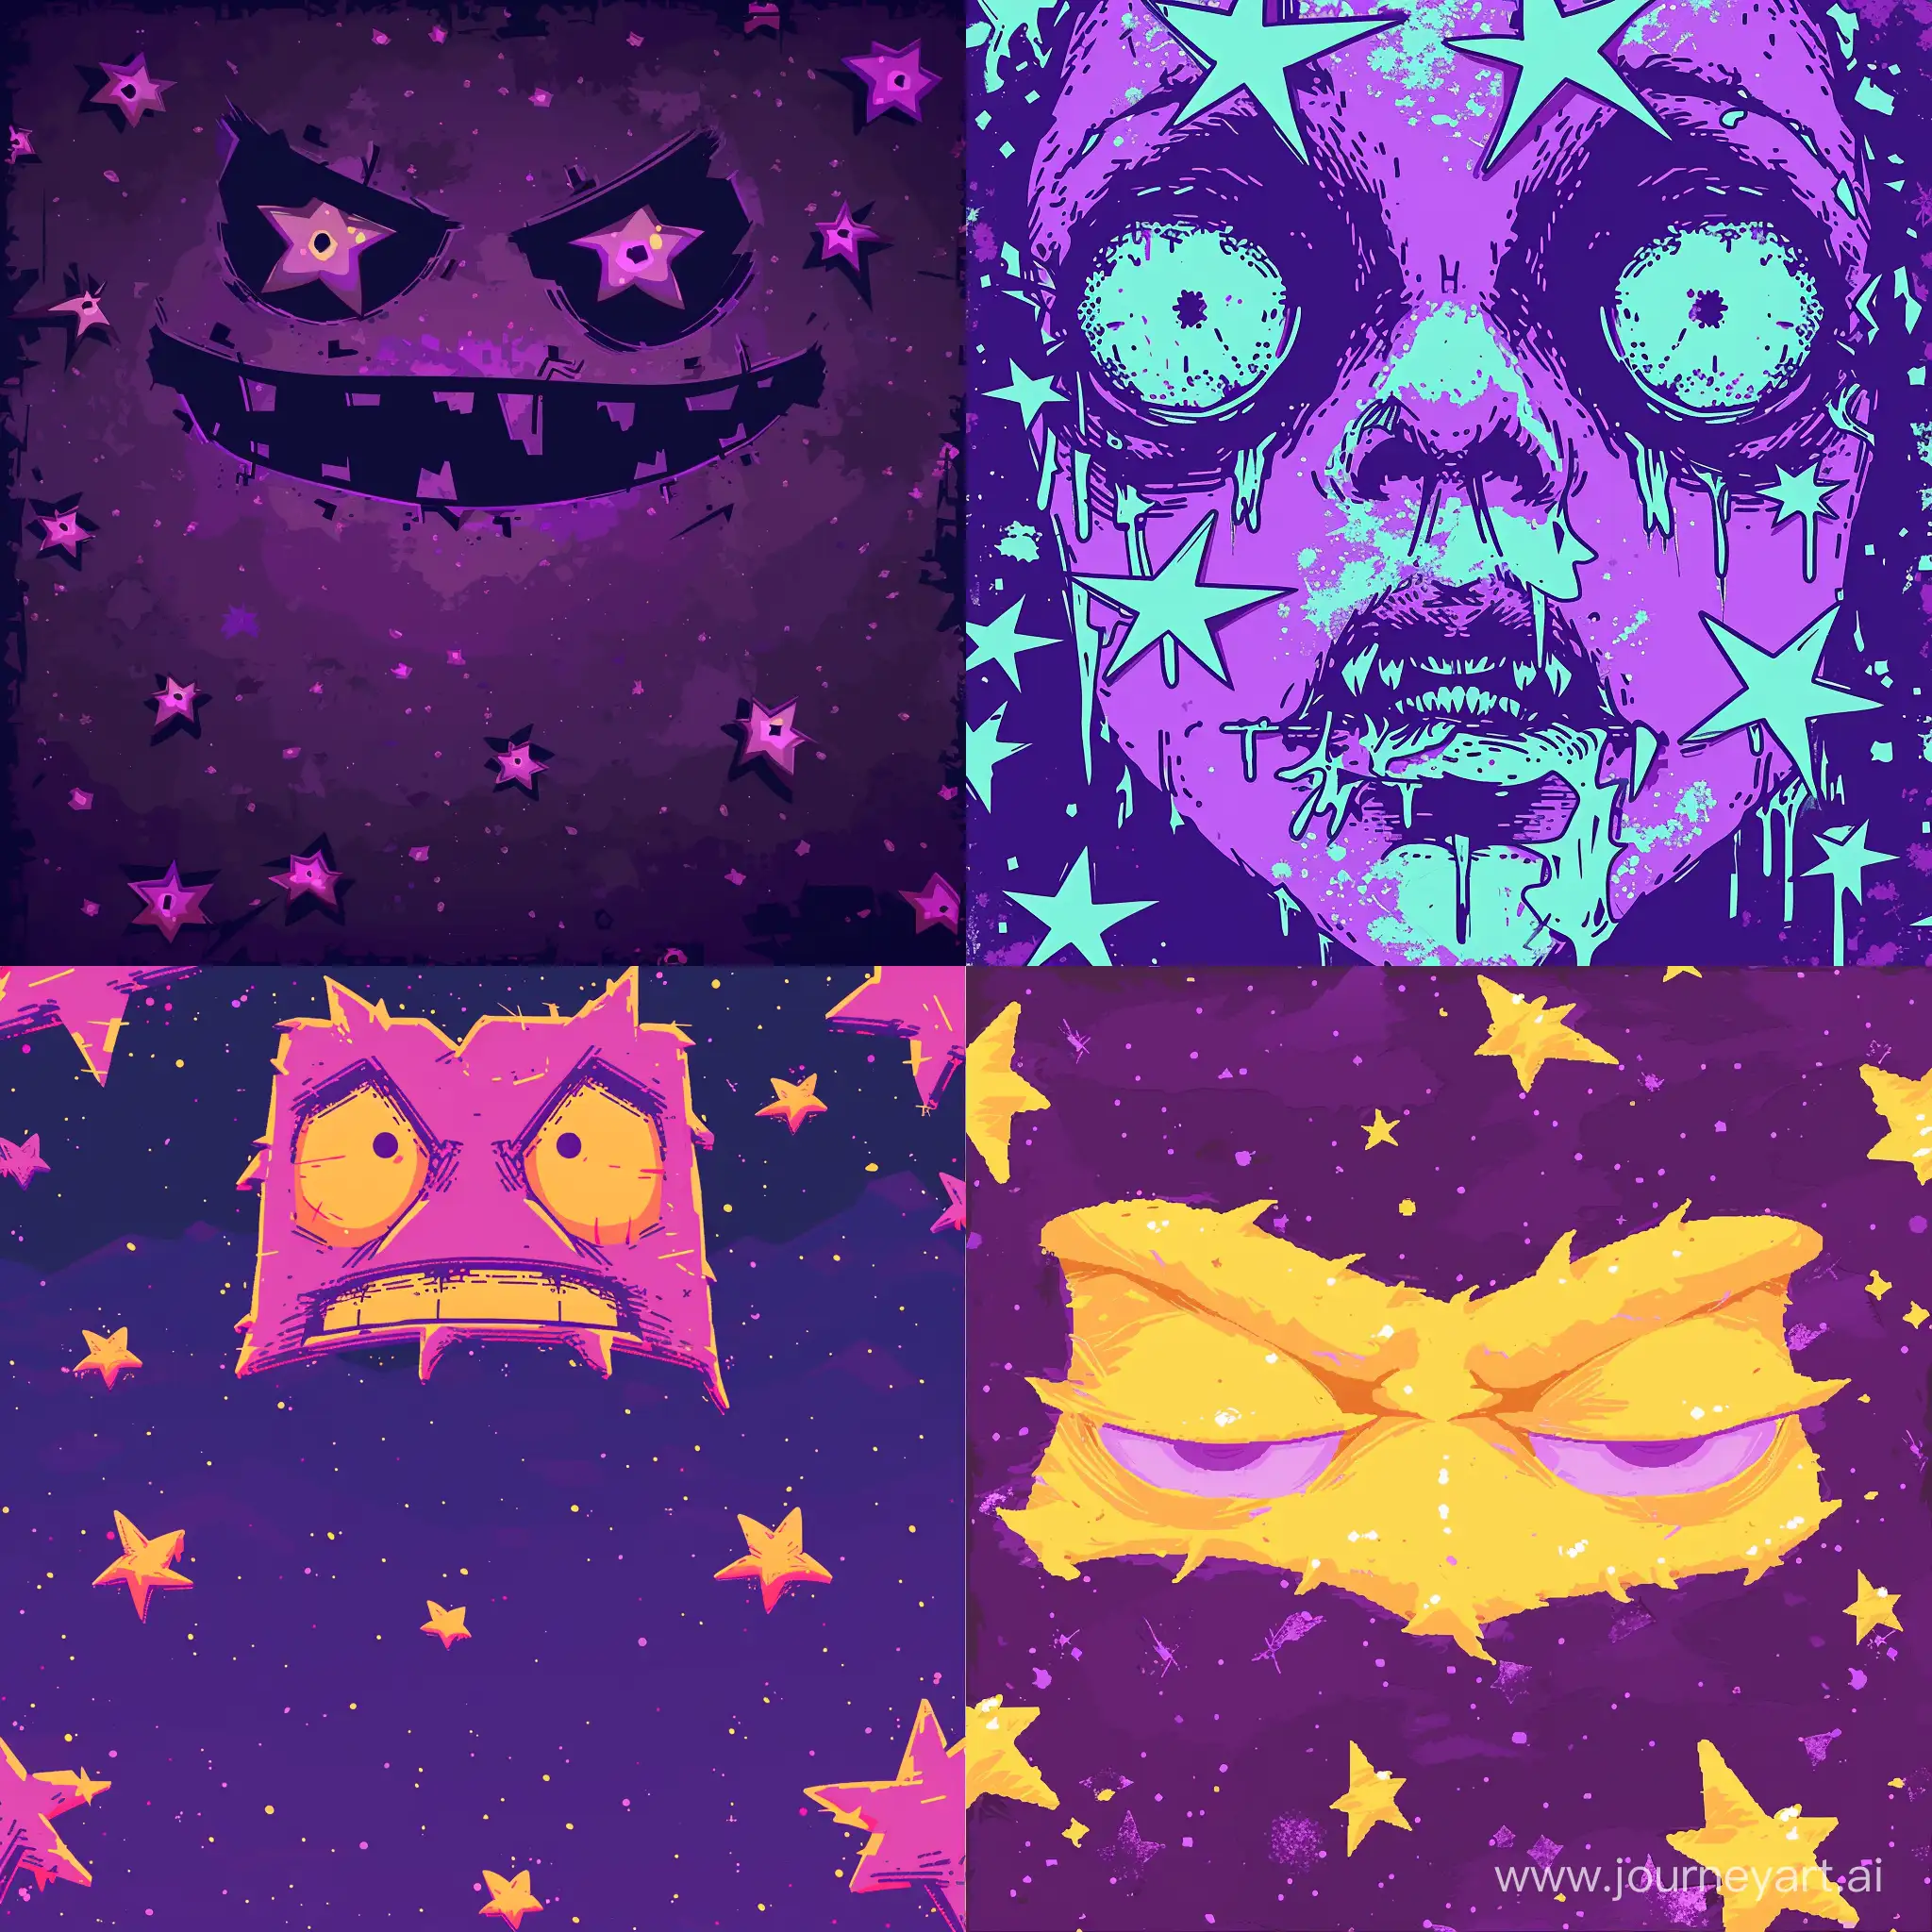 2D, purple background with repeating patterns of pixelated sloppy stars, drawn creepy but at the same time attractive face in the style of old games, bloom, Y2K era, pixelated image